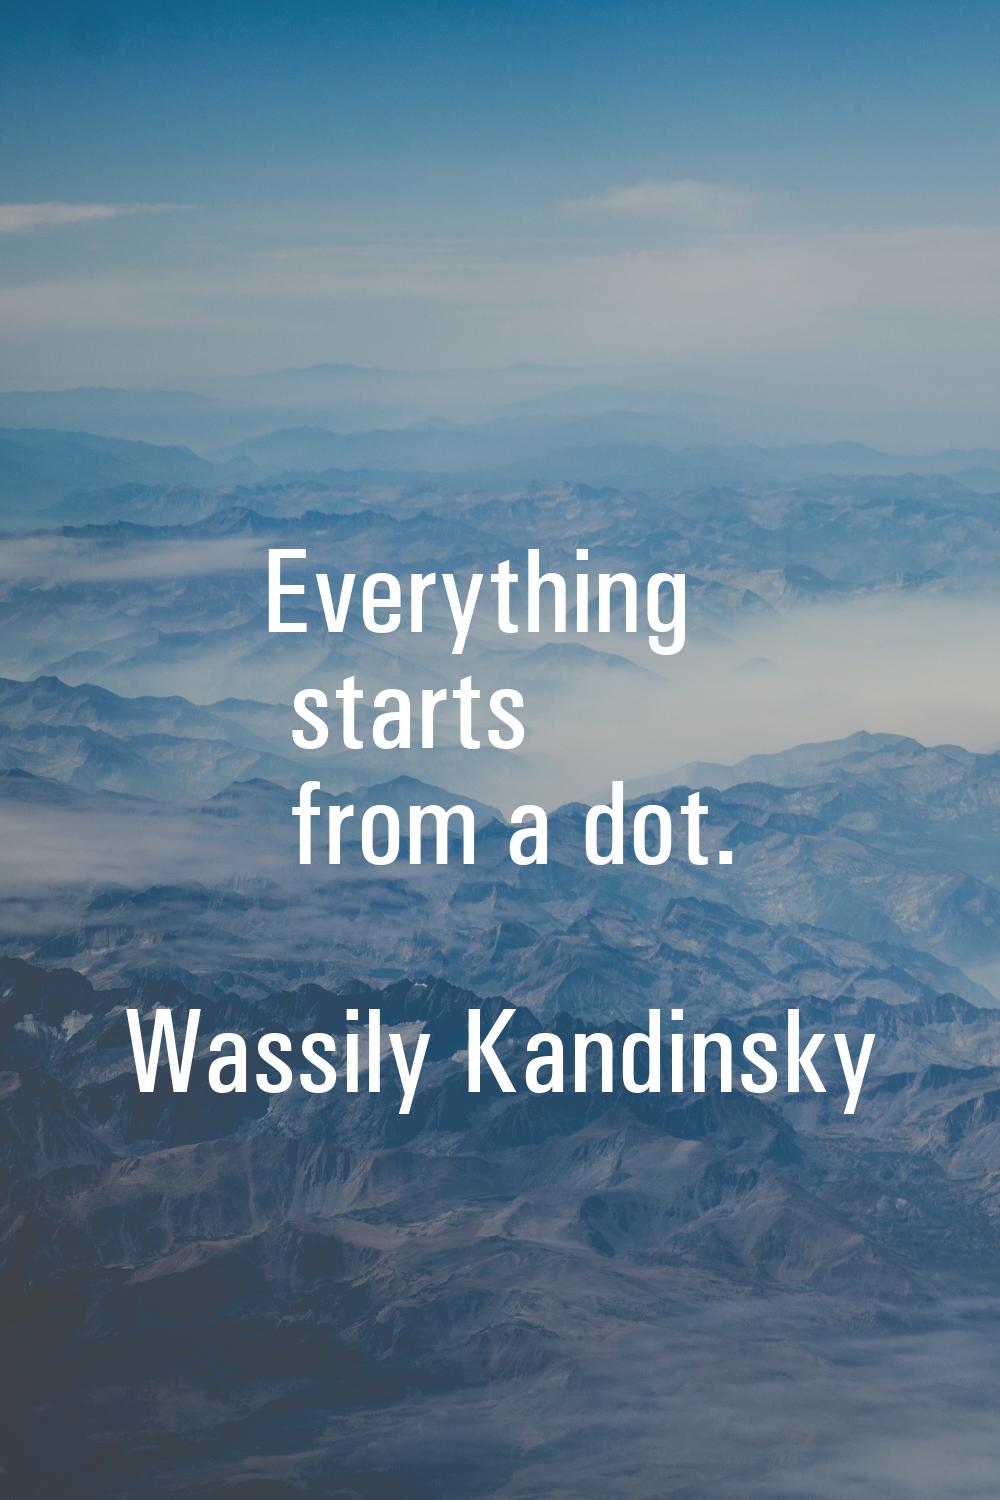 Everything starts from a dot.